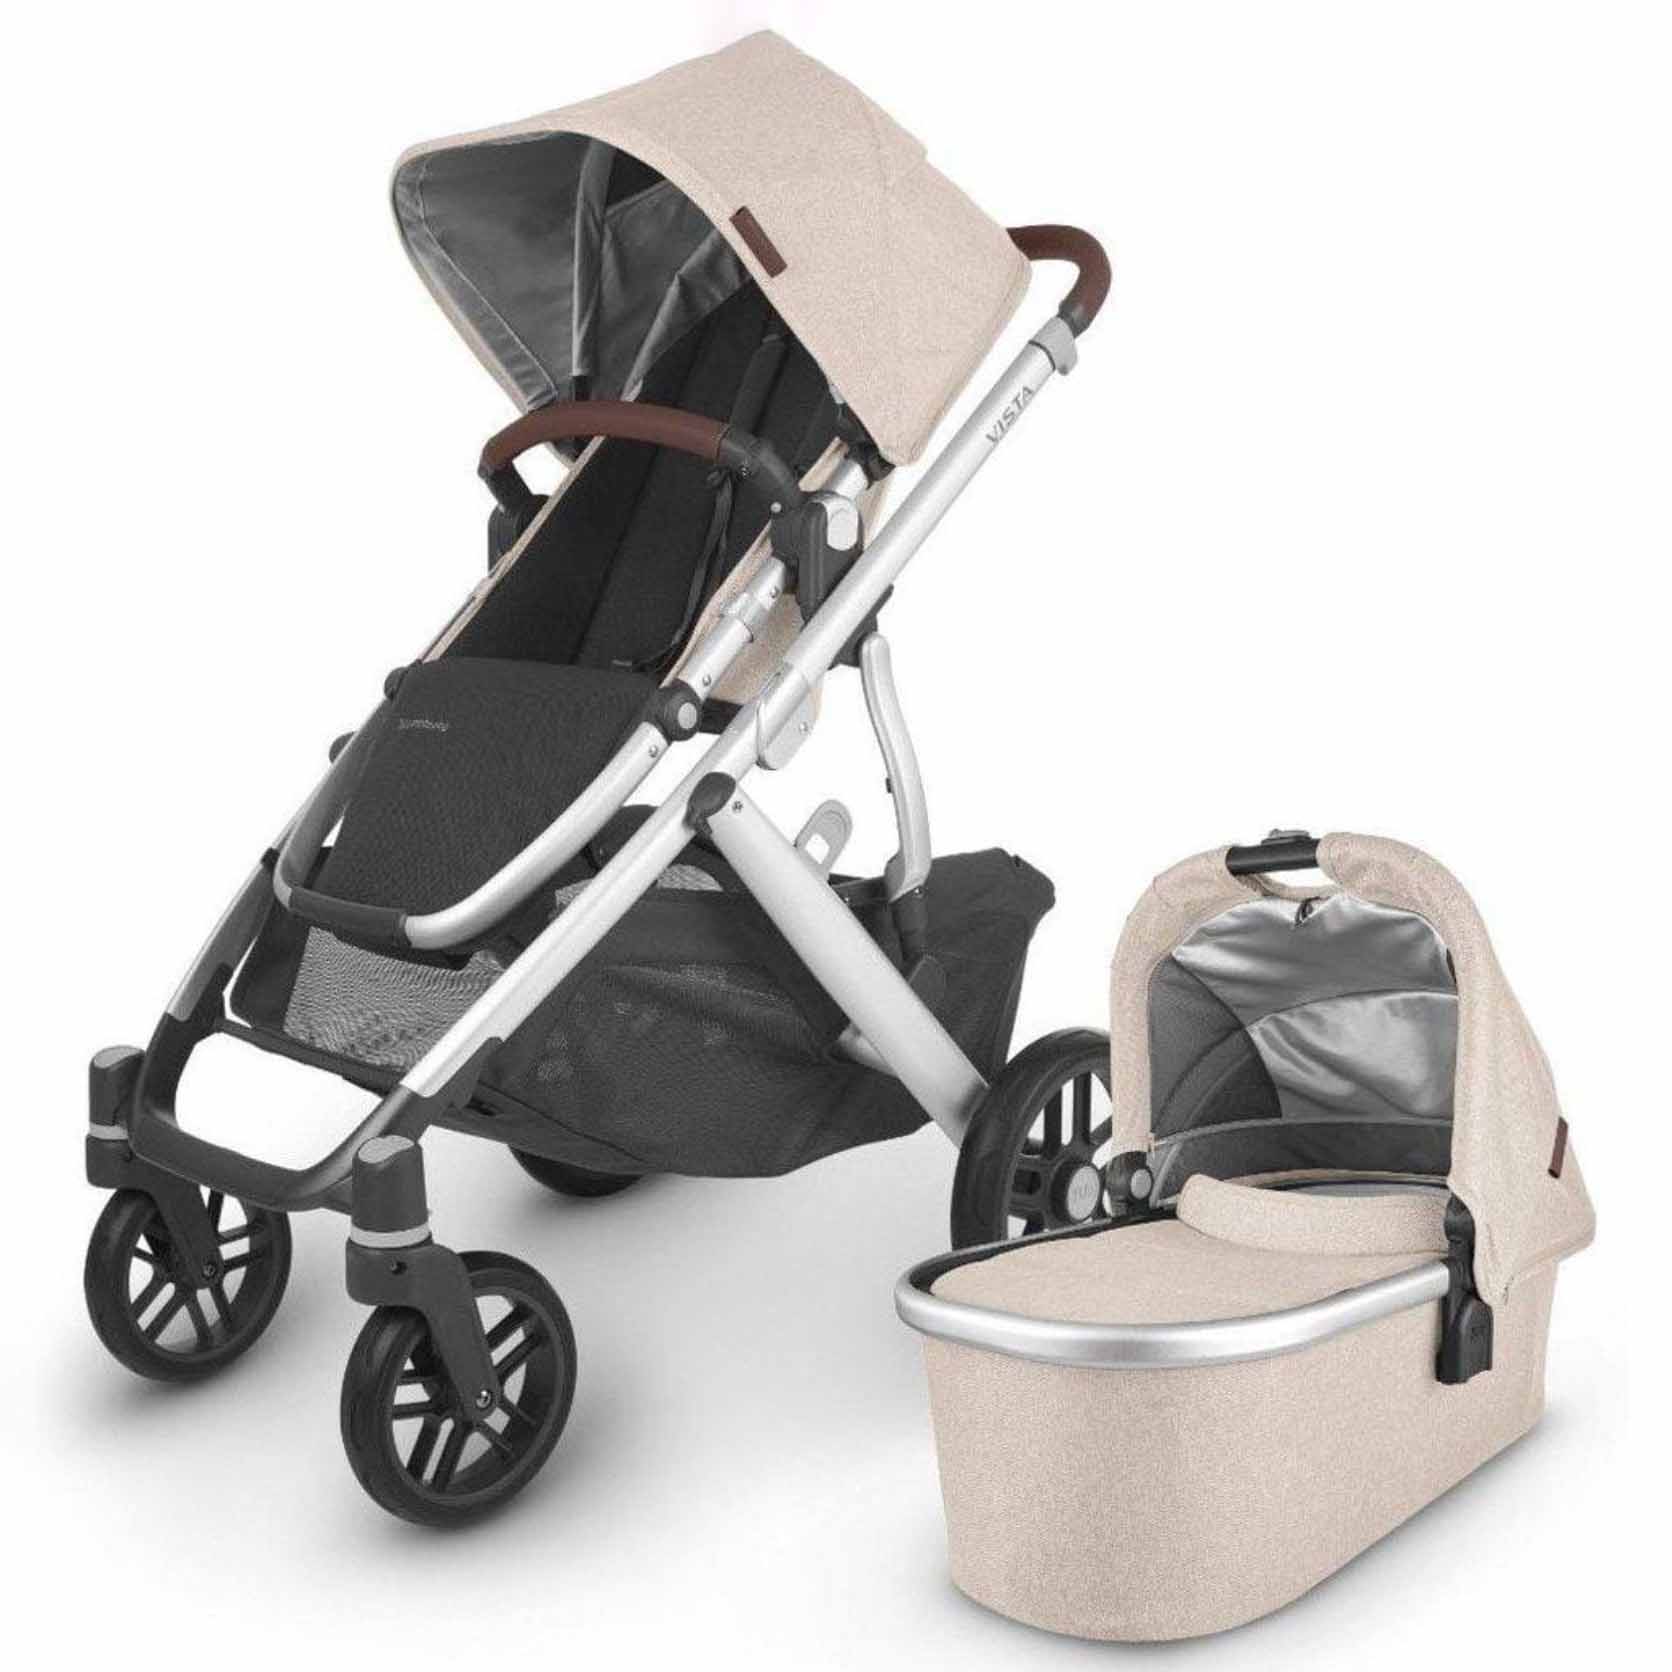 Cream-colored stroller and bassinet